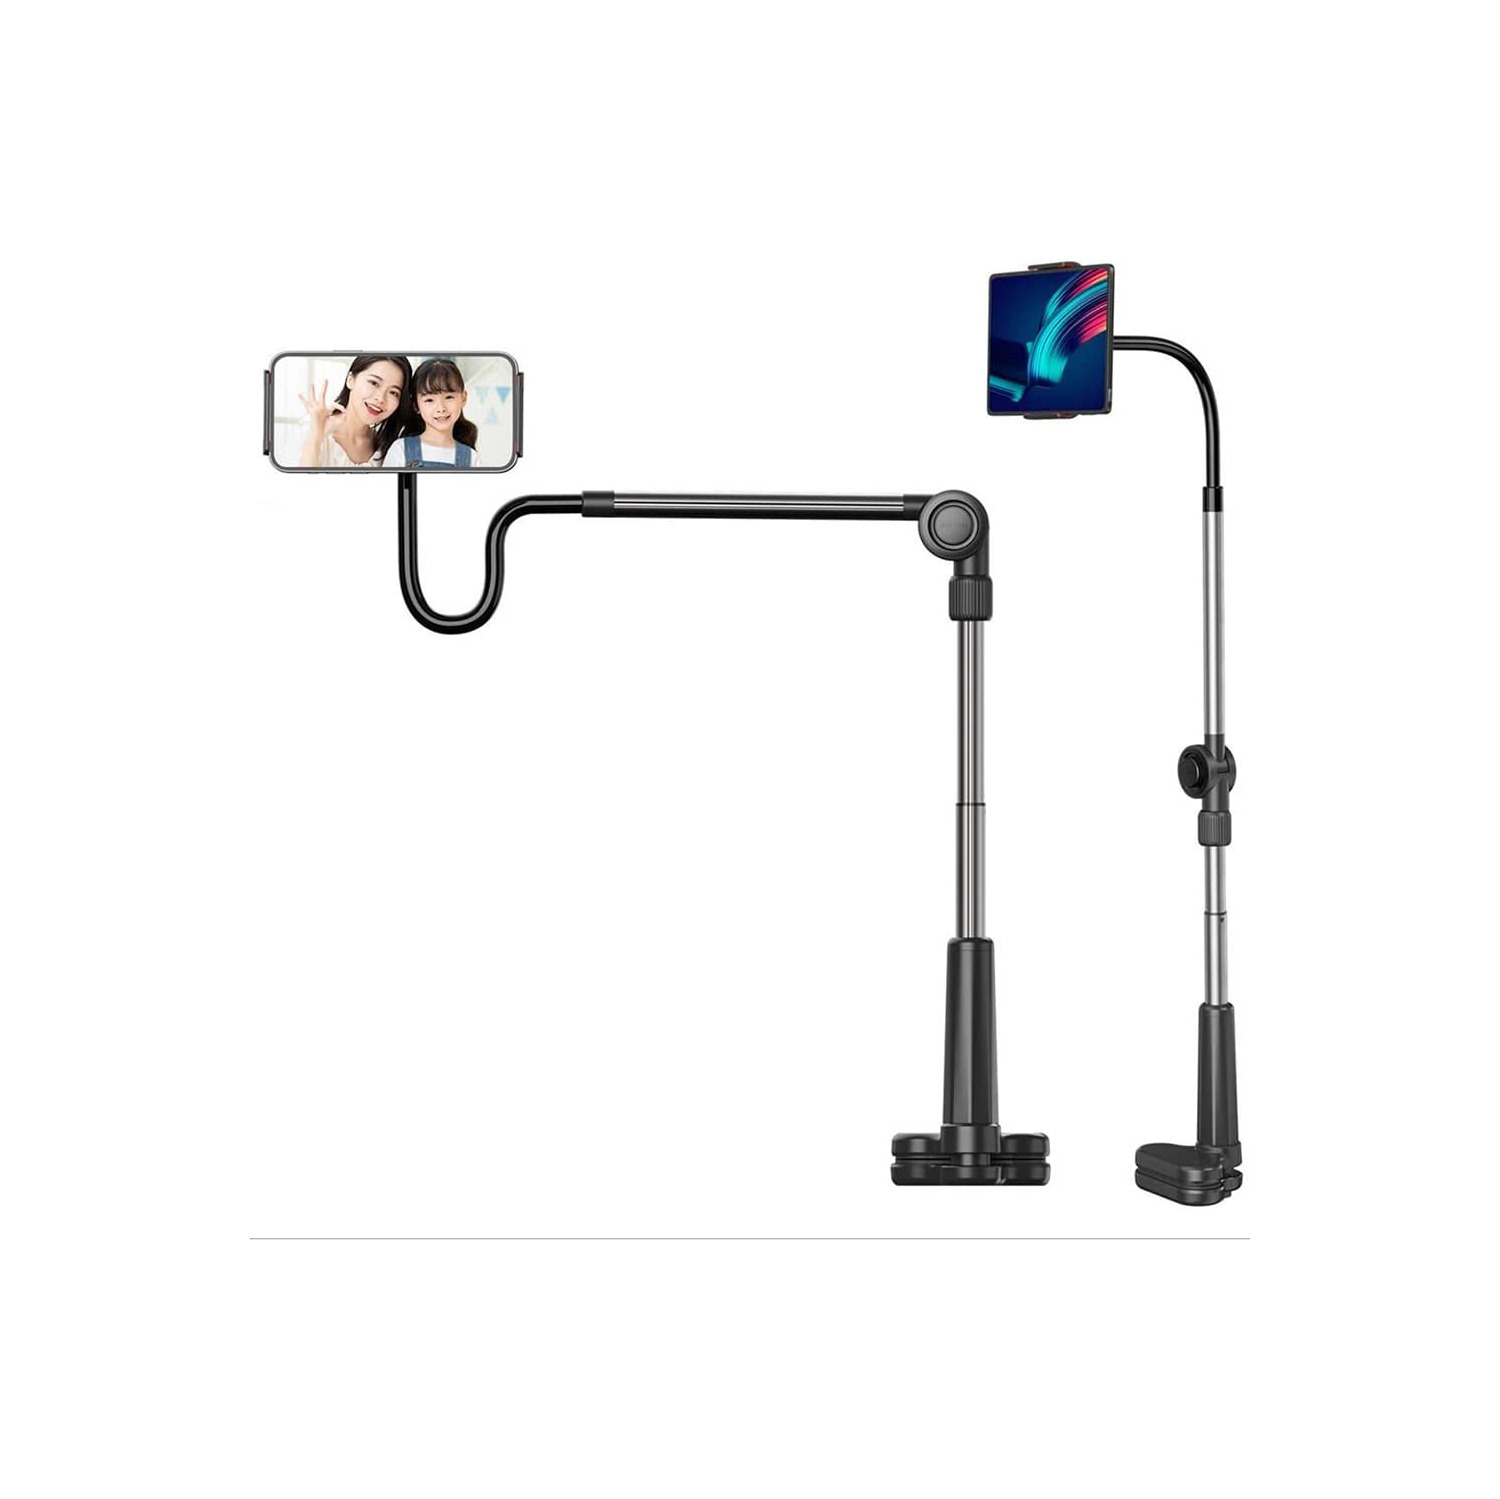 navor Cell Phone/Tablet Holder Stand for Desk, Compatible with iPhone 13/12/11/X/8/7, Compatible with Samsung Galaxy S22/S21/S20/S10, LG and More Smartphones and Tablets (4.5"-7'')